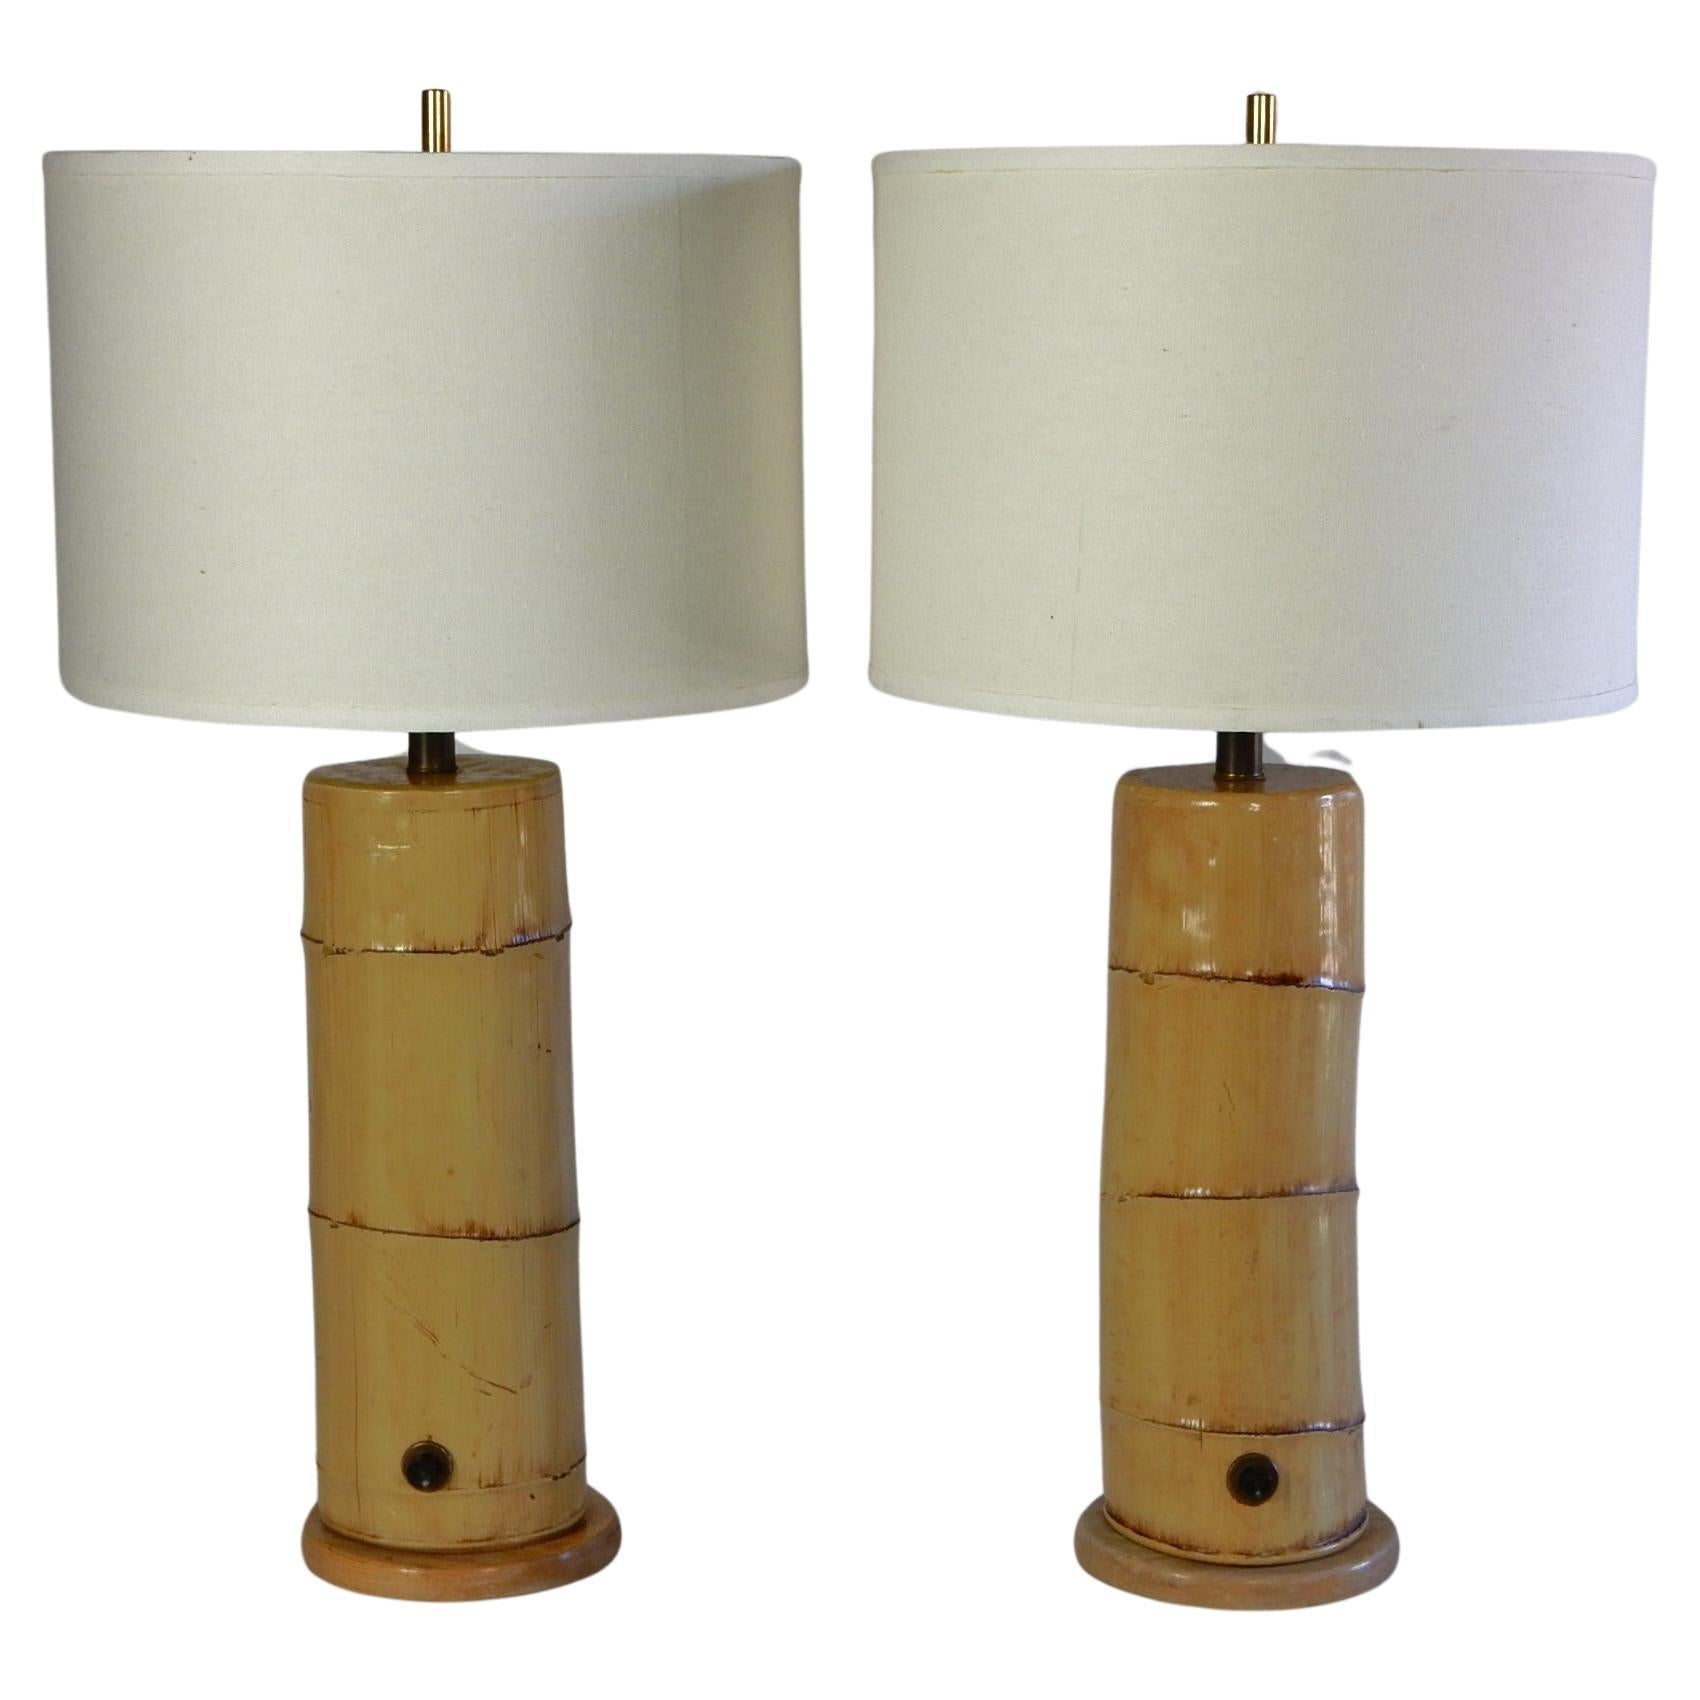 Vintage Faux Bamboo Plaster Table Lamps from the Moana Hotel, Hawaii 1960's For Sale 4